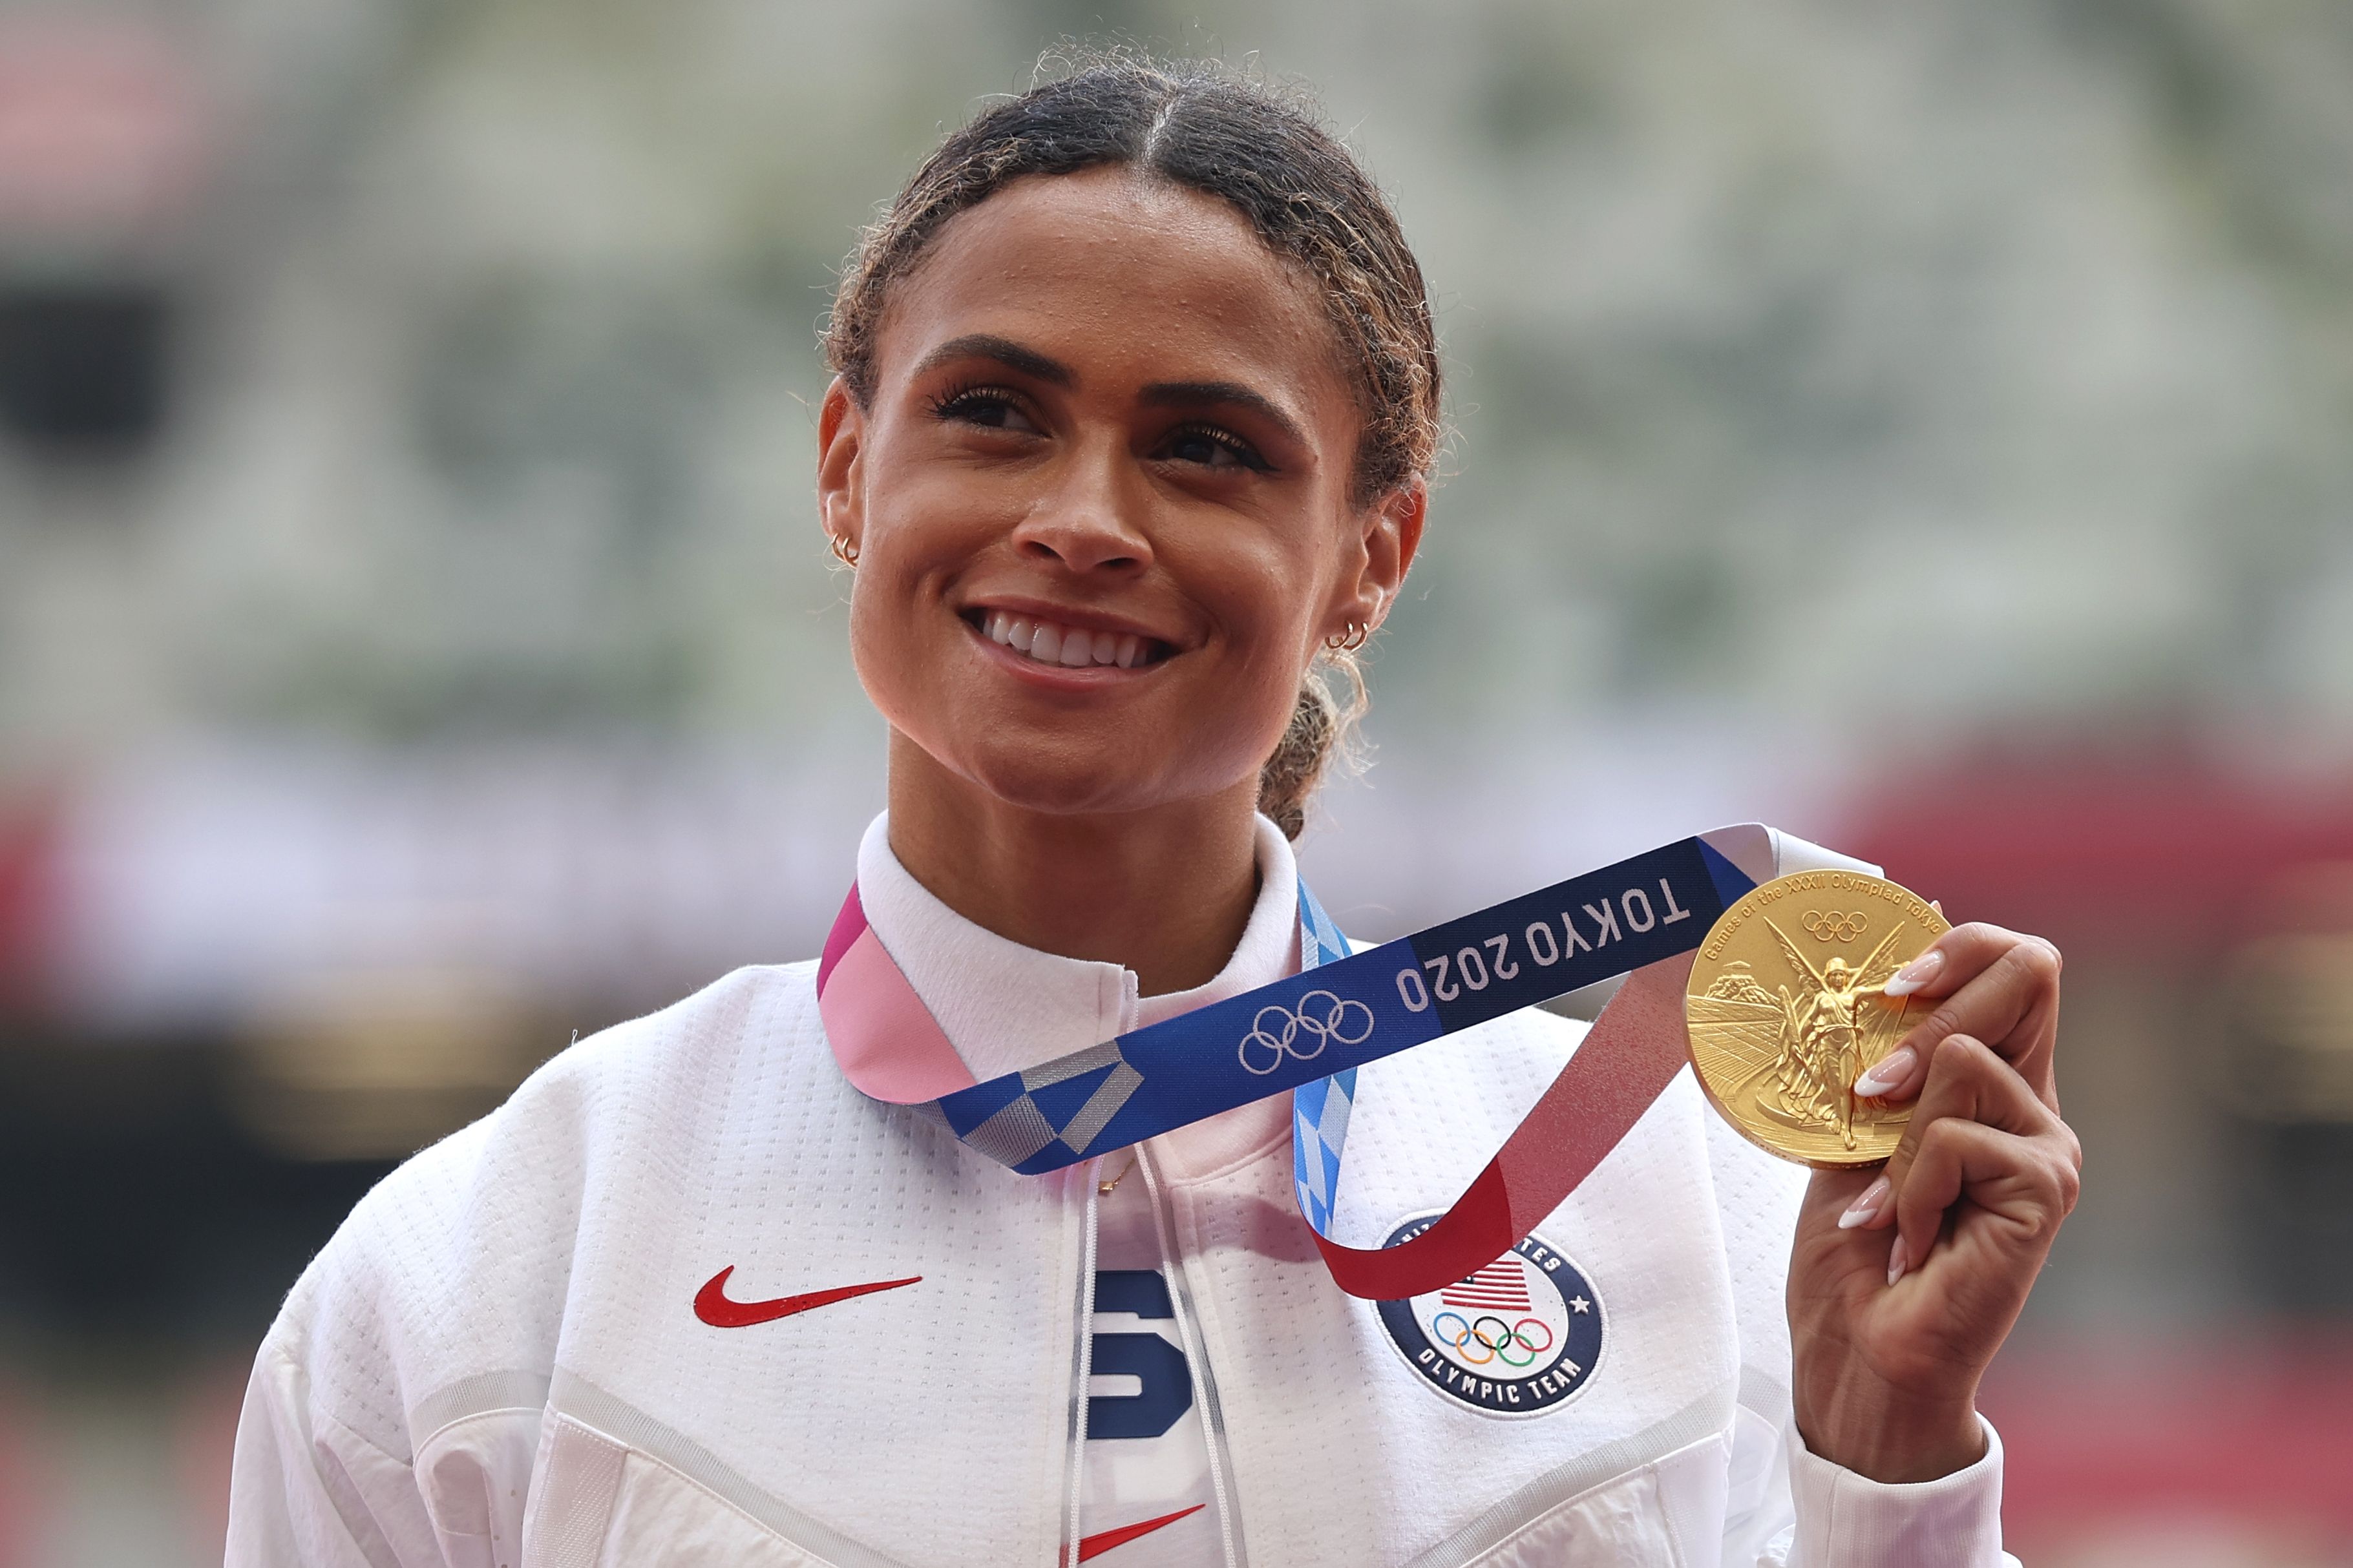 Who Is Sydney McLaughlin? Watch Her Break the 400m Hurdle Record